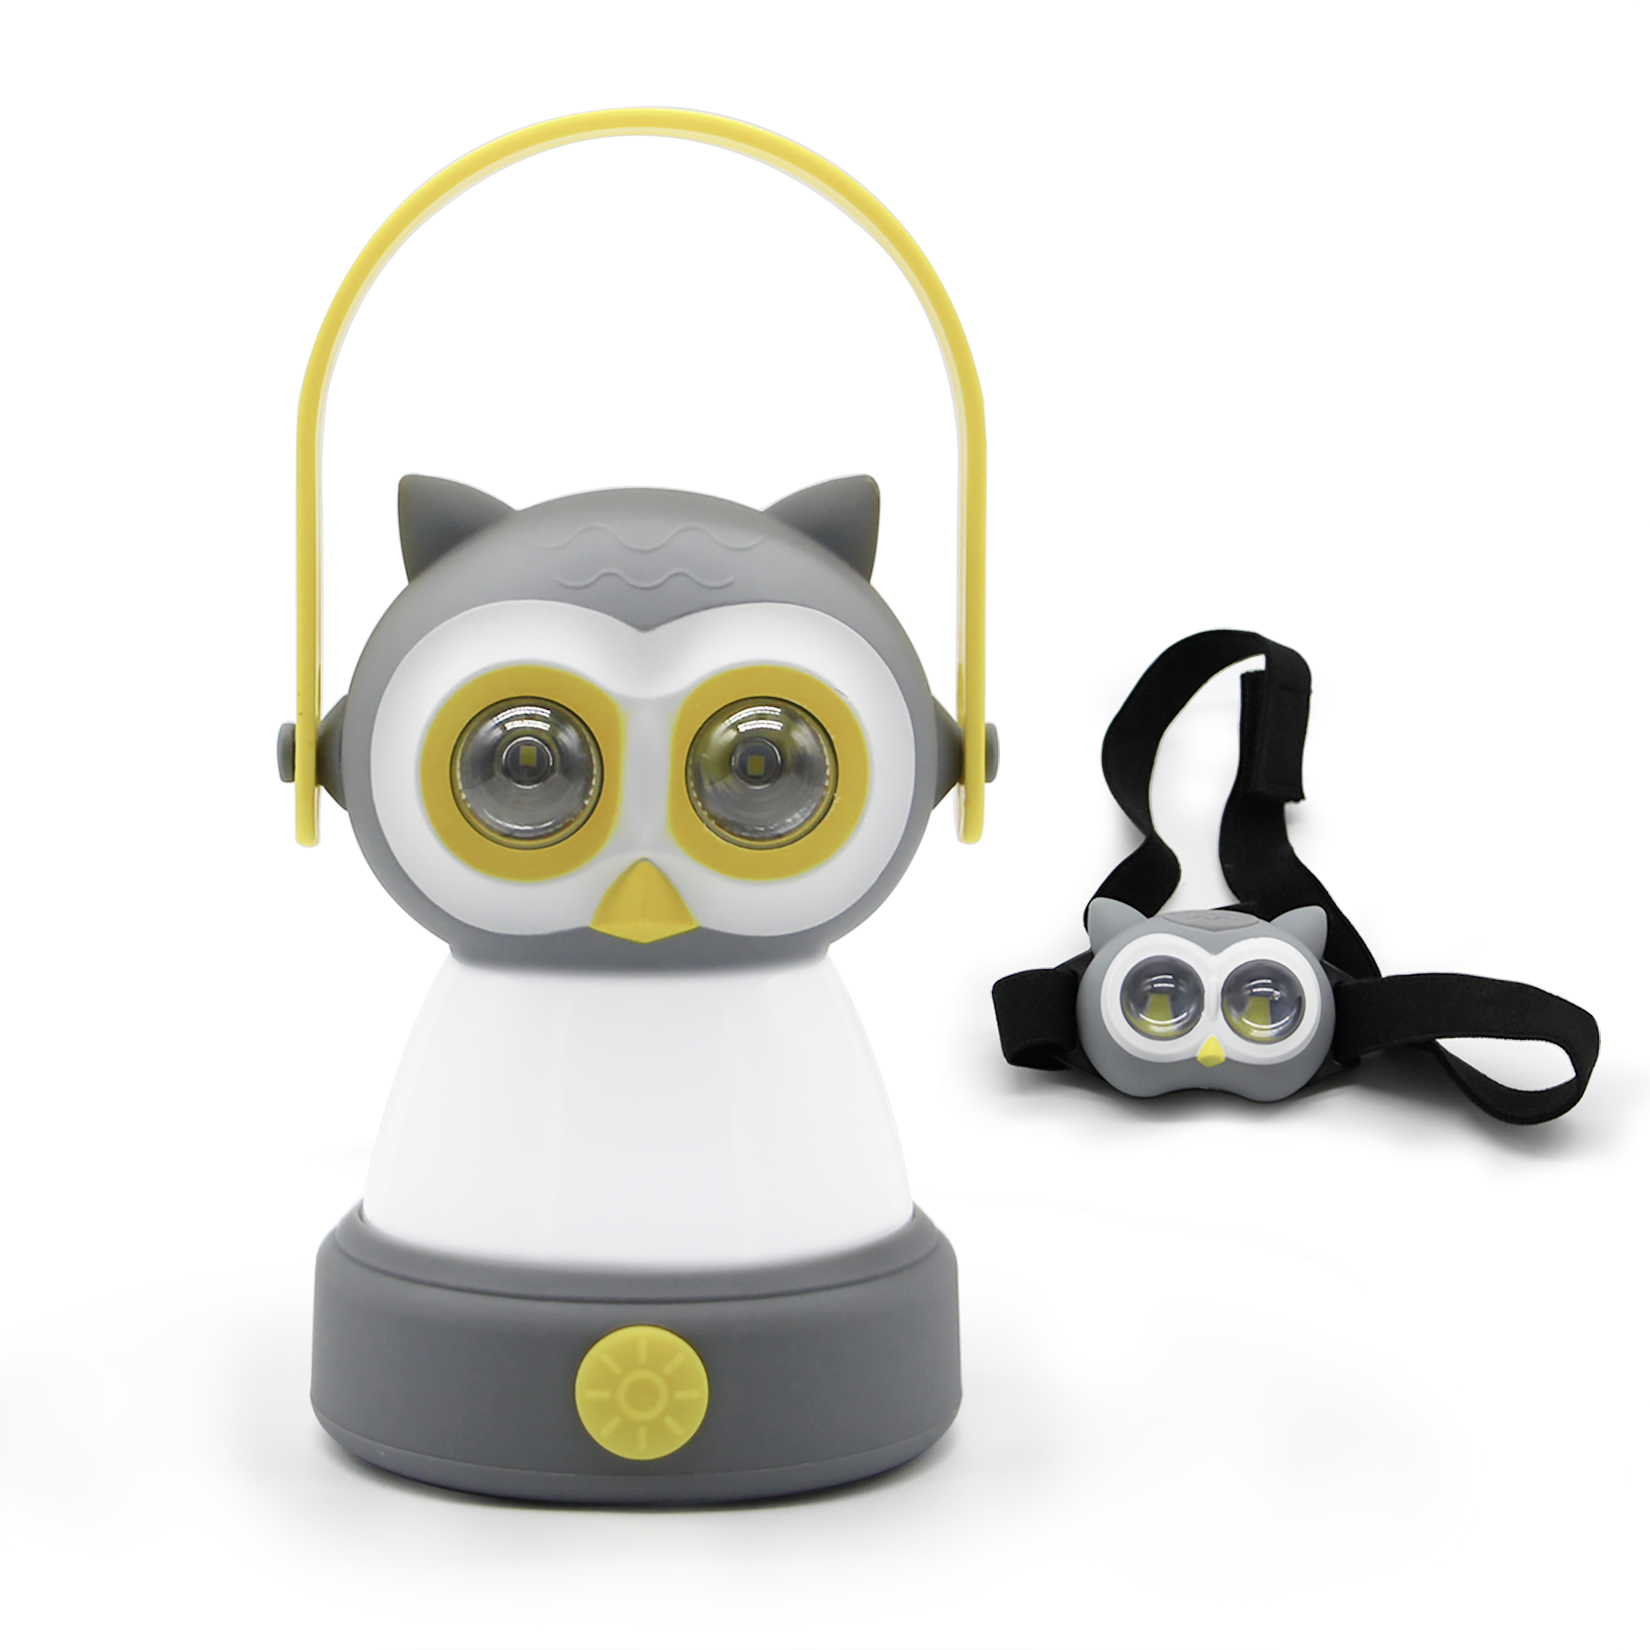 FANT.LUX Owl Themed Headlamp and Lantern Combo for Camping Outdoor Equipment Battery Powered Lightweight Tent Lamp - image 1 of 8